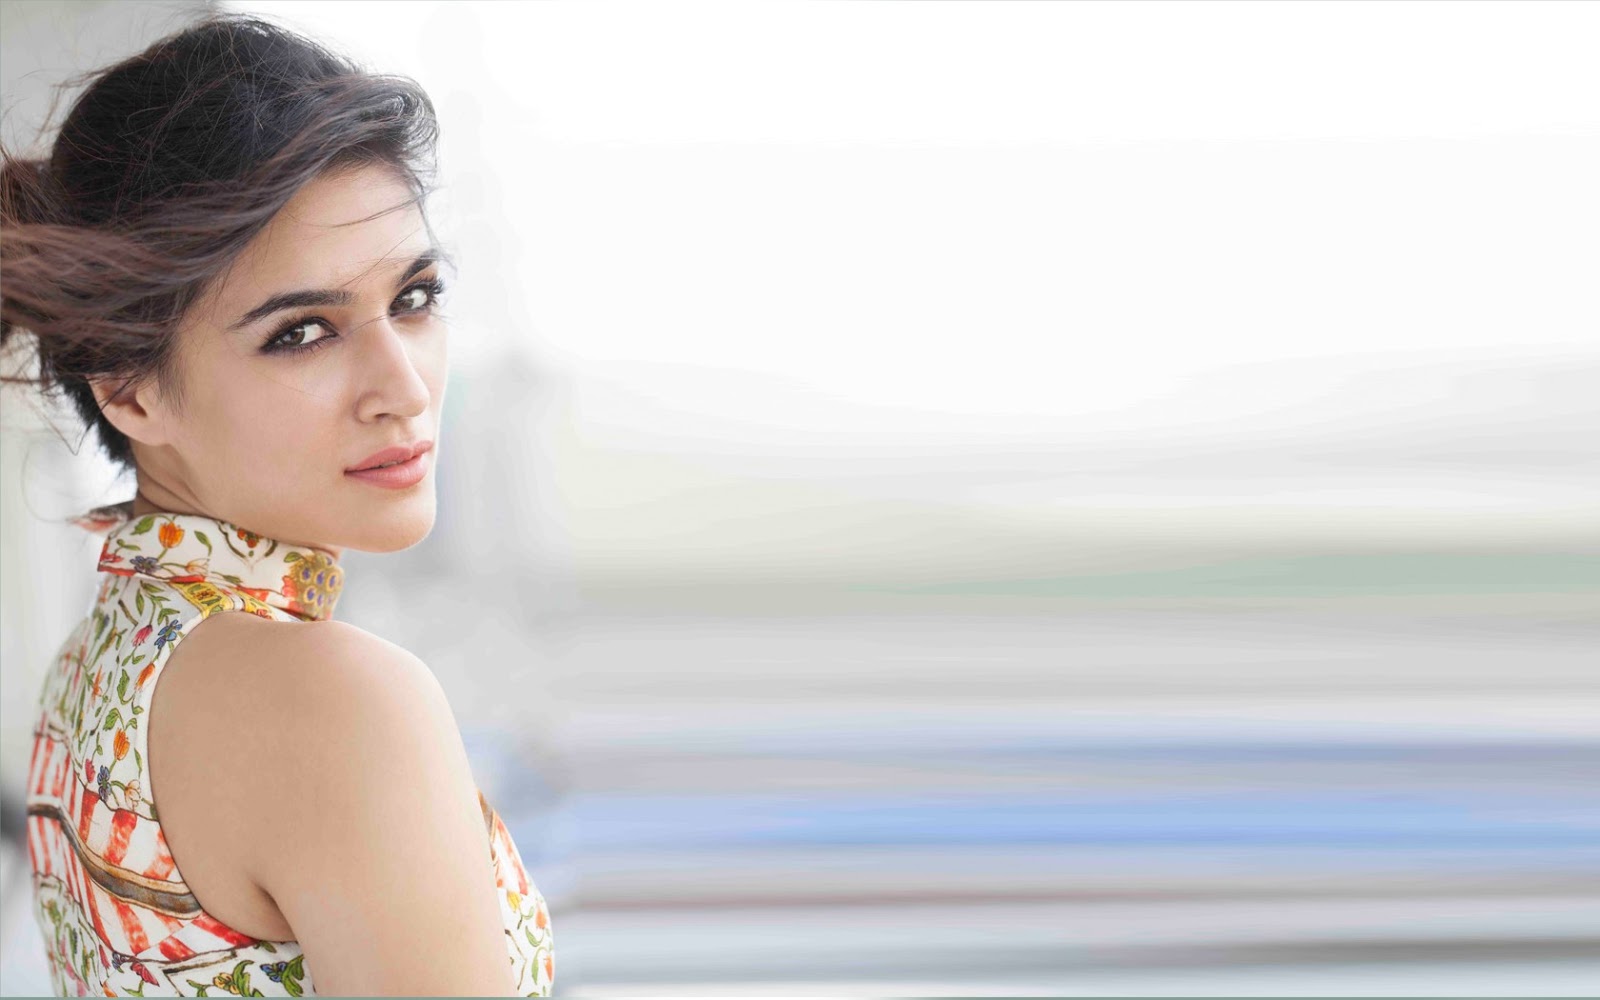 Kriti Sanon Latest Full Hd Wallpapers Hot And Sexy 2020